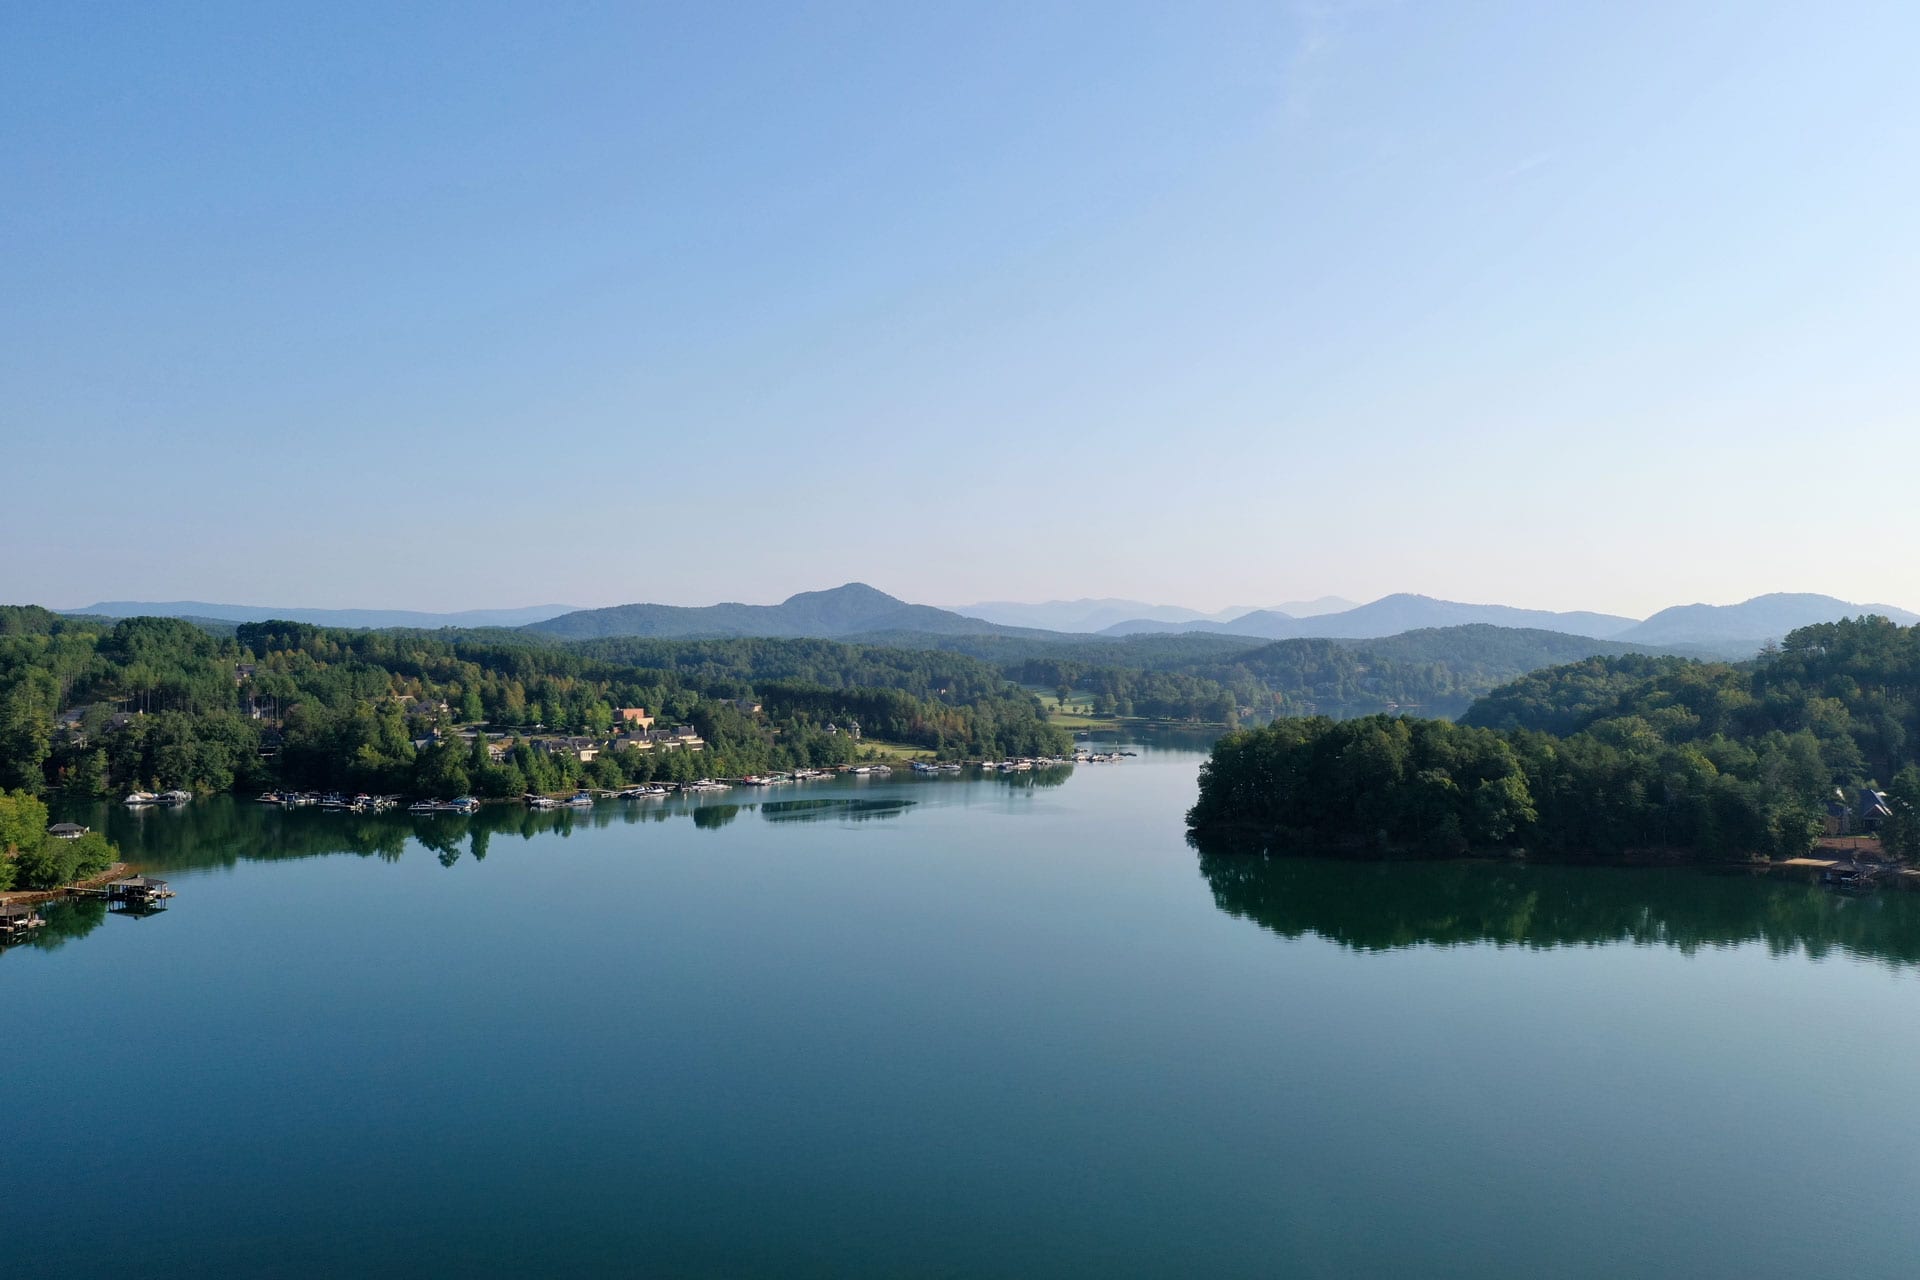 Drone image of lake, trees and mountains in the distance.